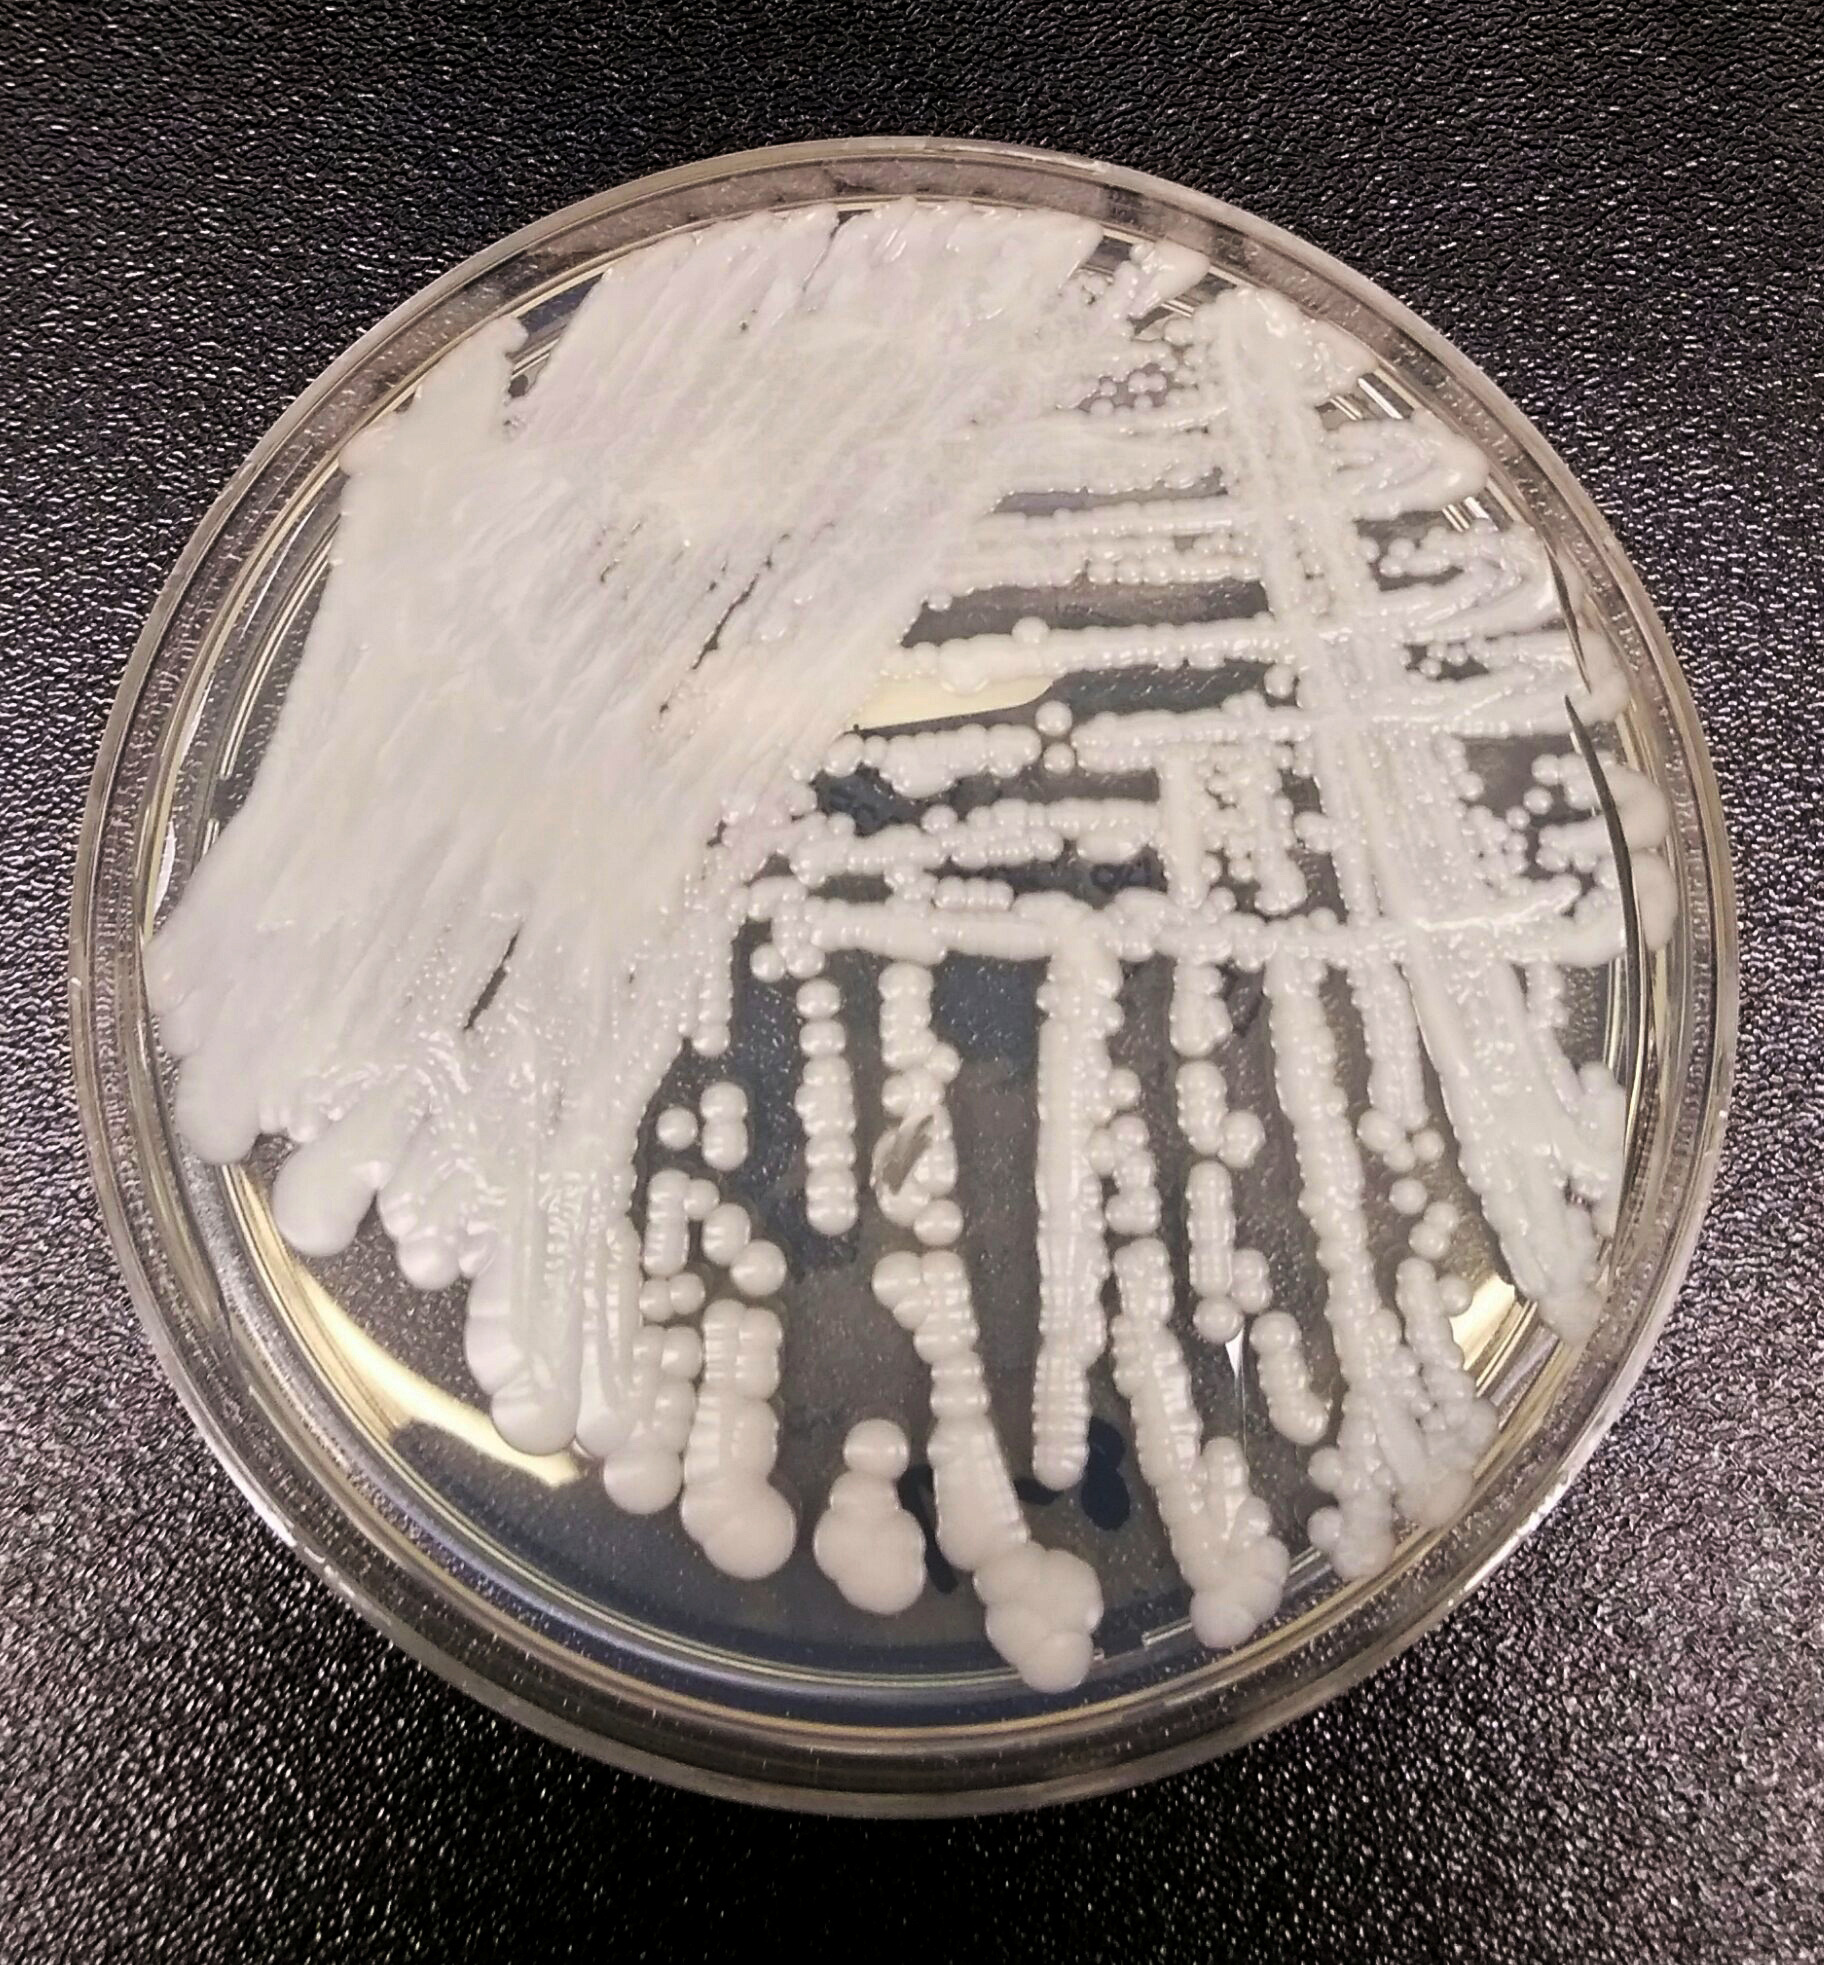 A strain of Candida auris cultured in a petri dish at the Centers for Disease Control and Prevention (CDC) is pictured in this handout photo